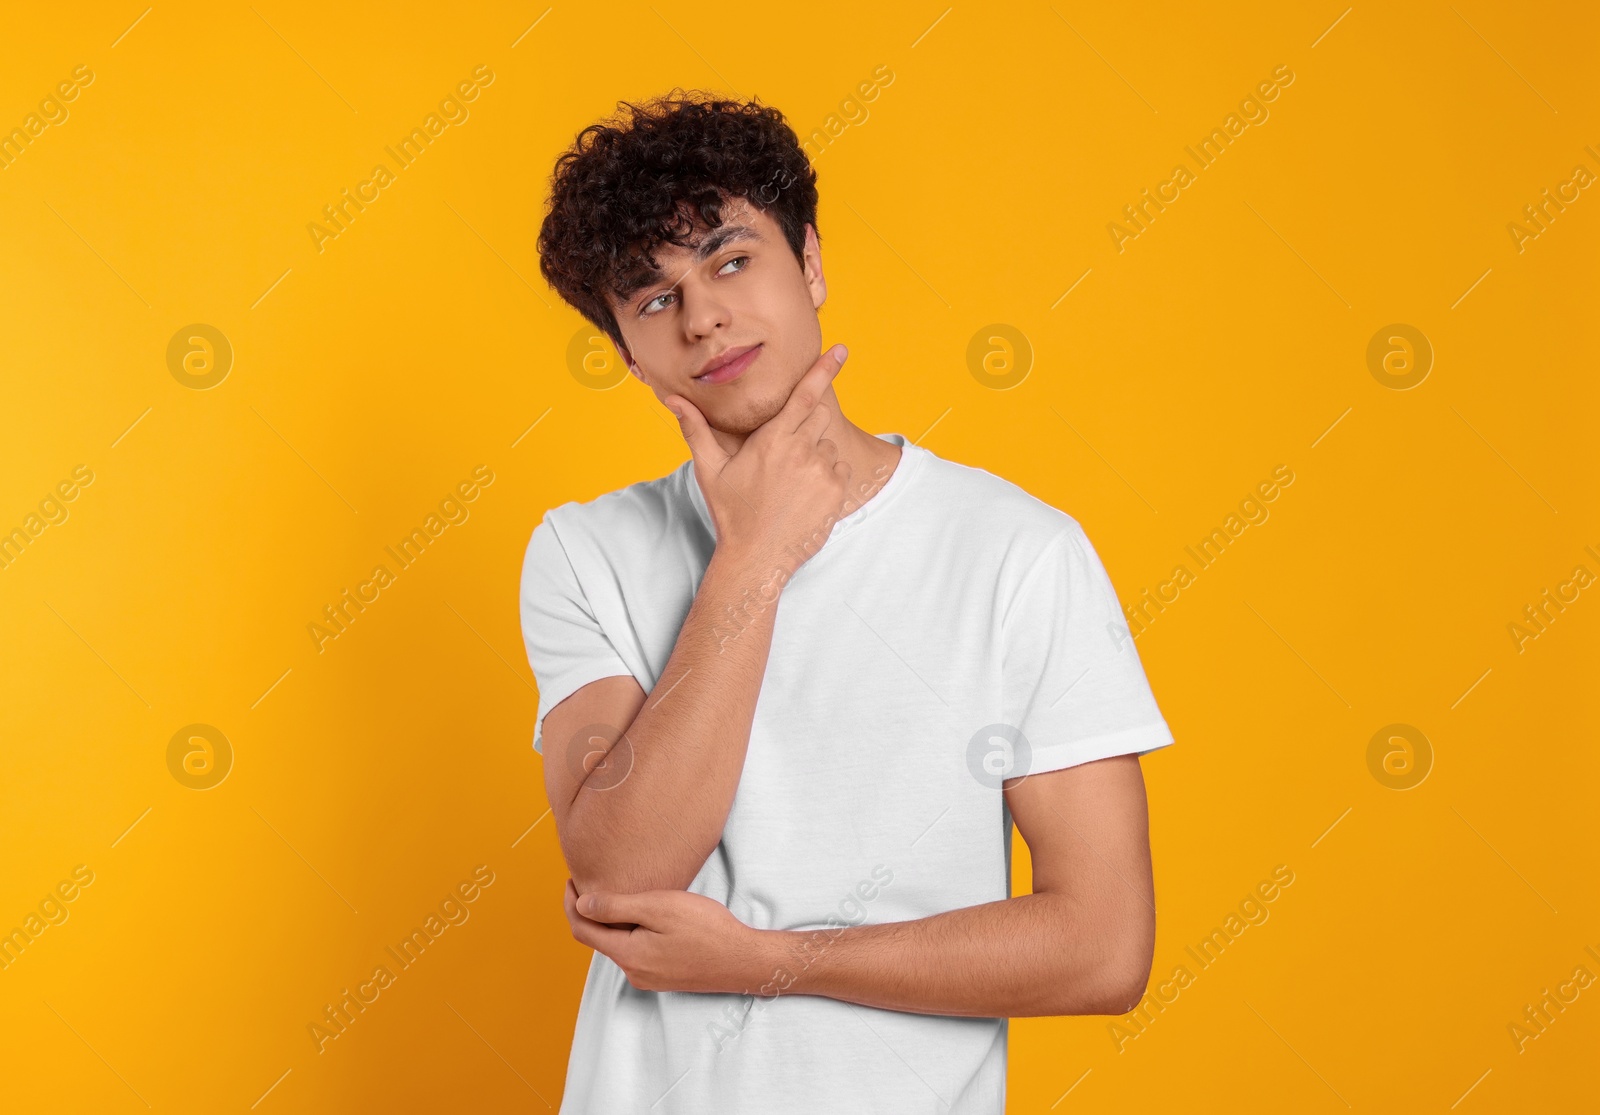 Photo of Portrait of handsome young man on orange background